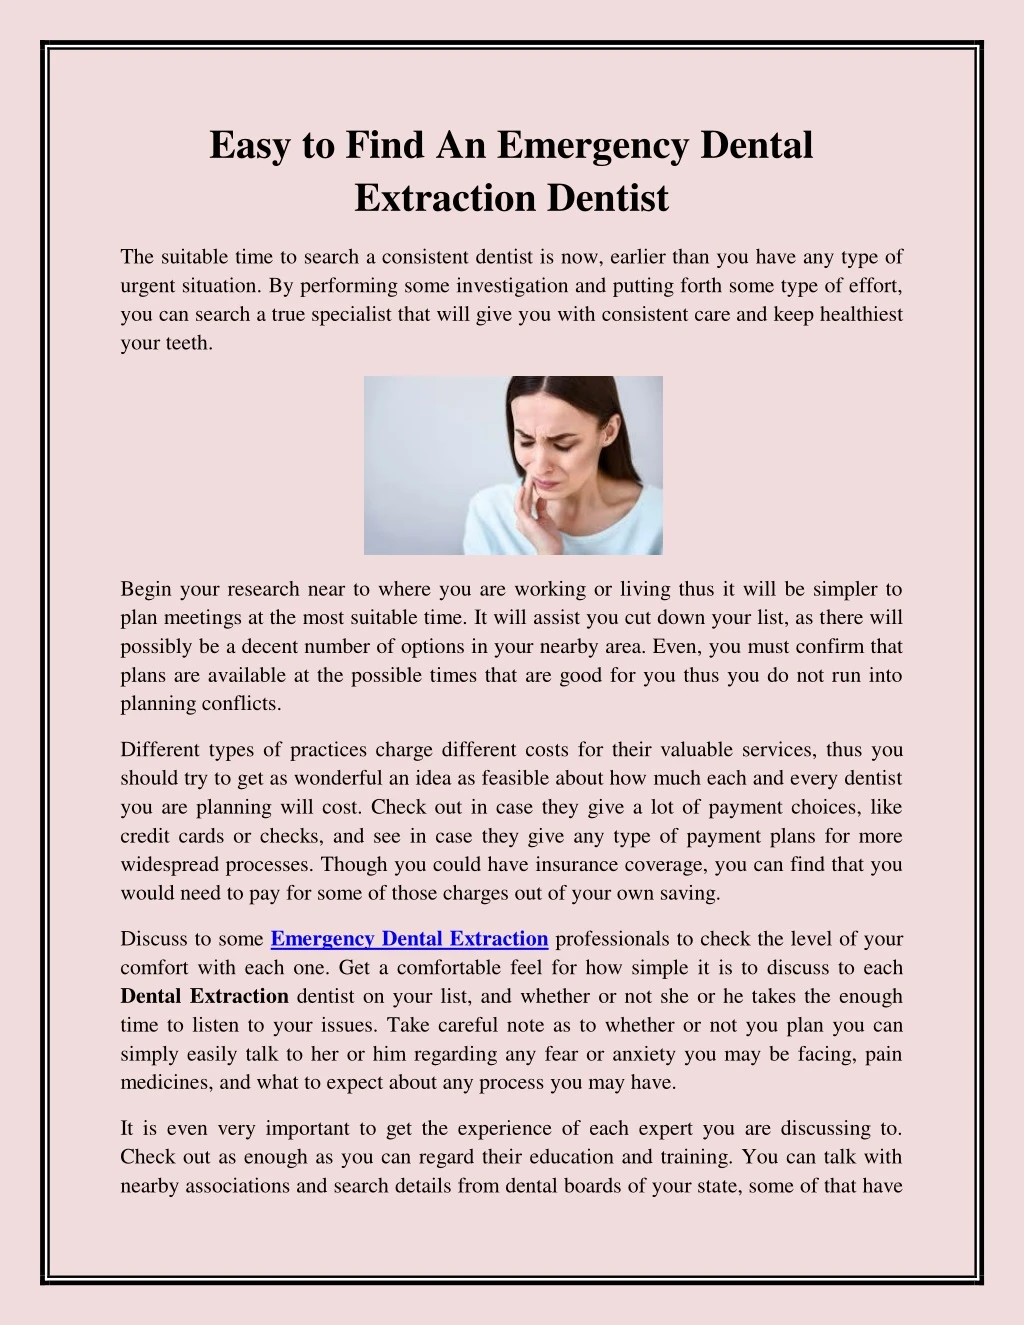 easy to find an emergency dental extraction